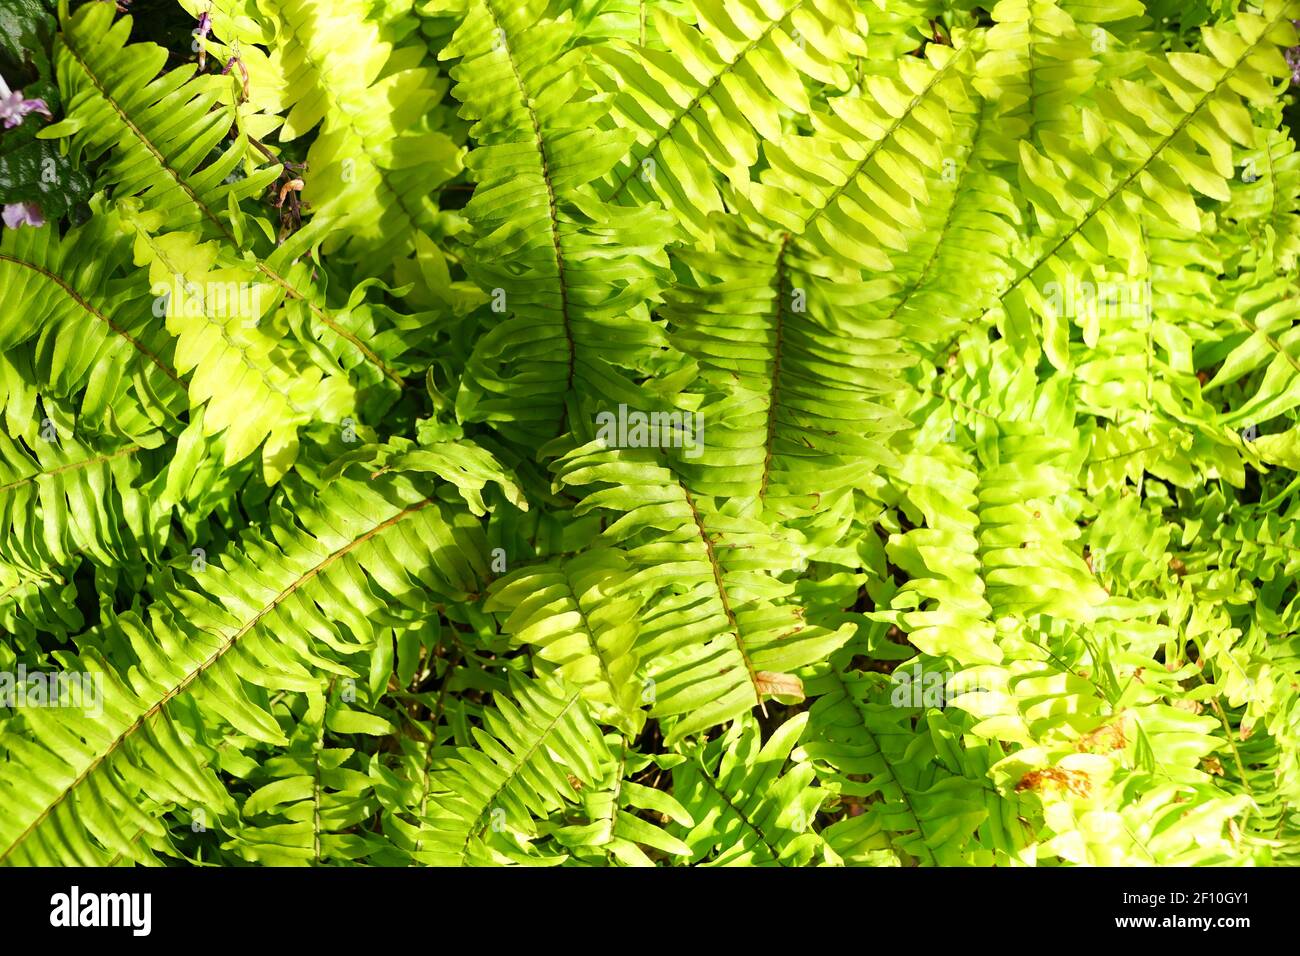 Lime green color of Boston Fern 'Rita's Gold' with scientific name Nephrolepis Exaltata Stock Photo